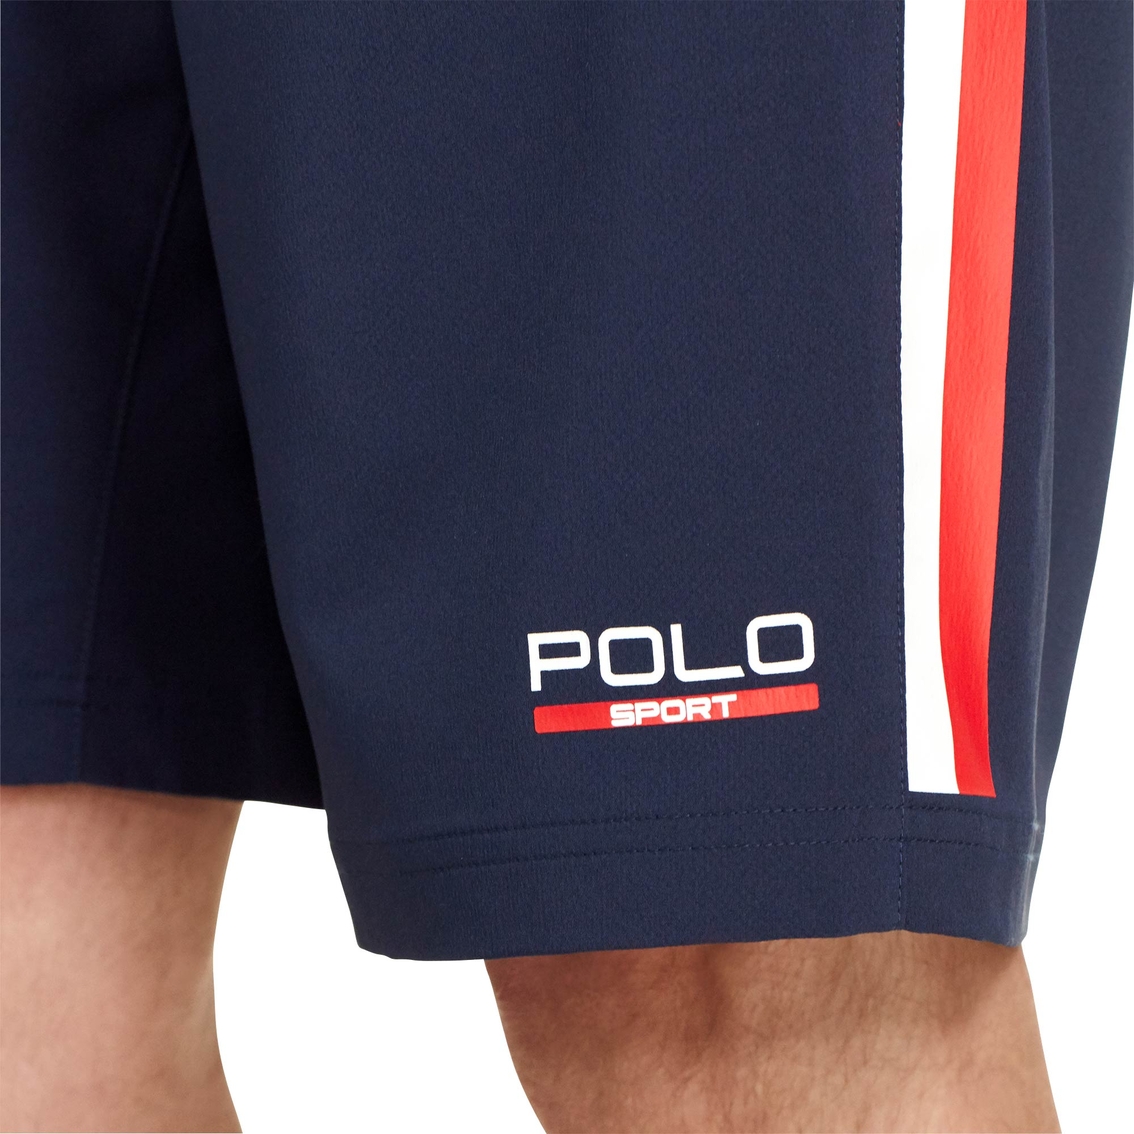 Polo Sport 10 in. All Sport Shorts - Image 3 of 3